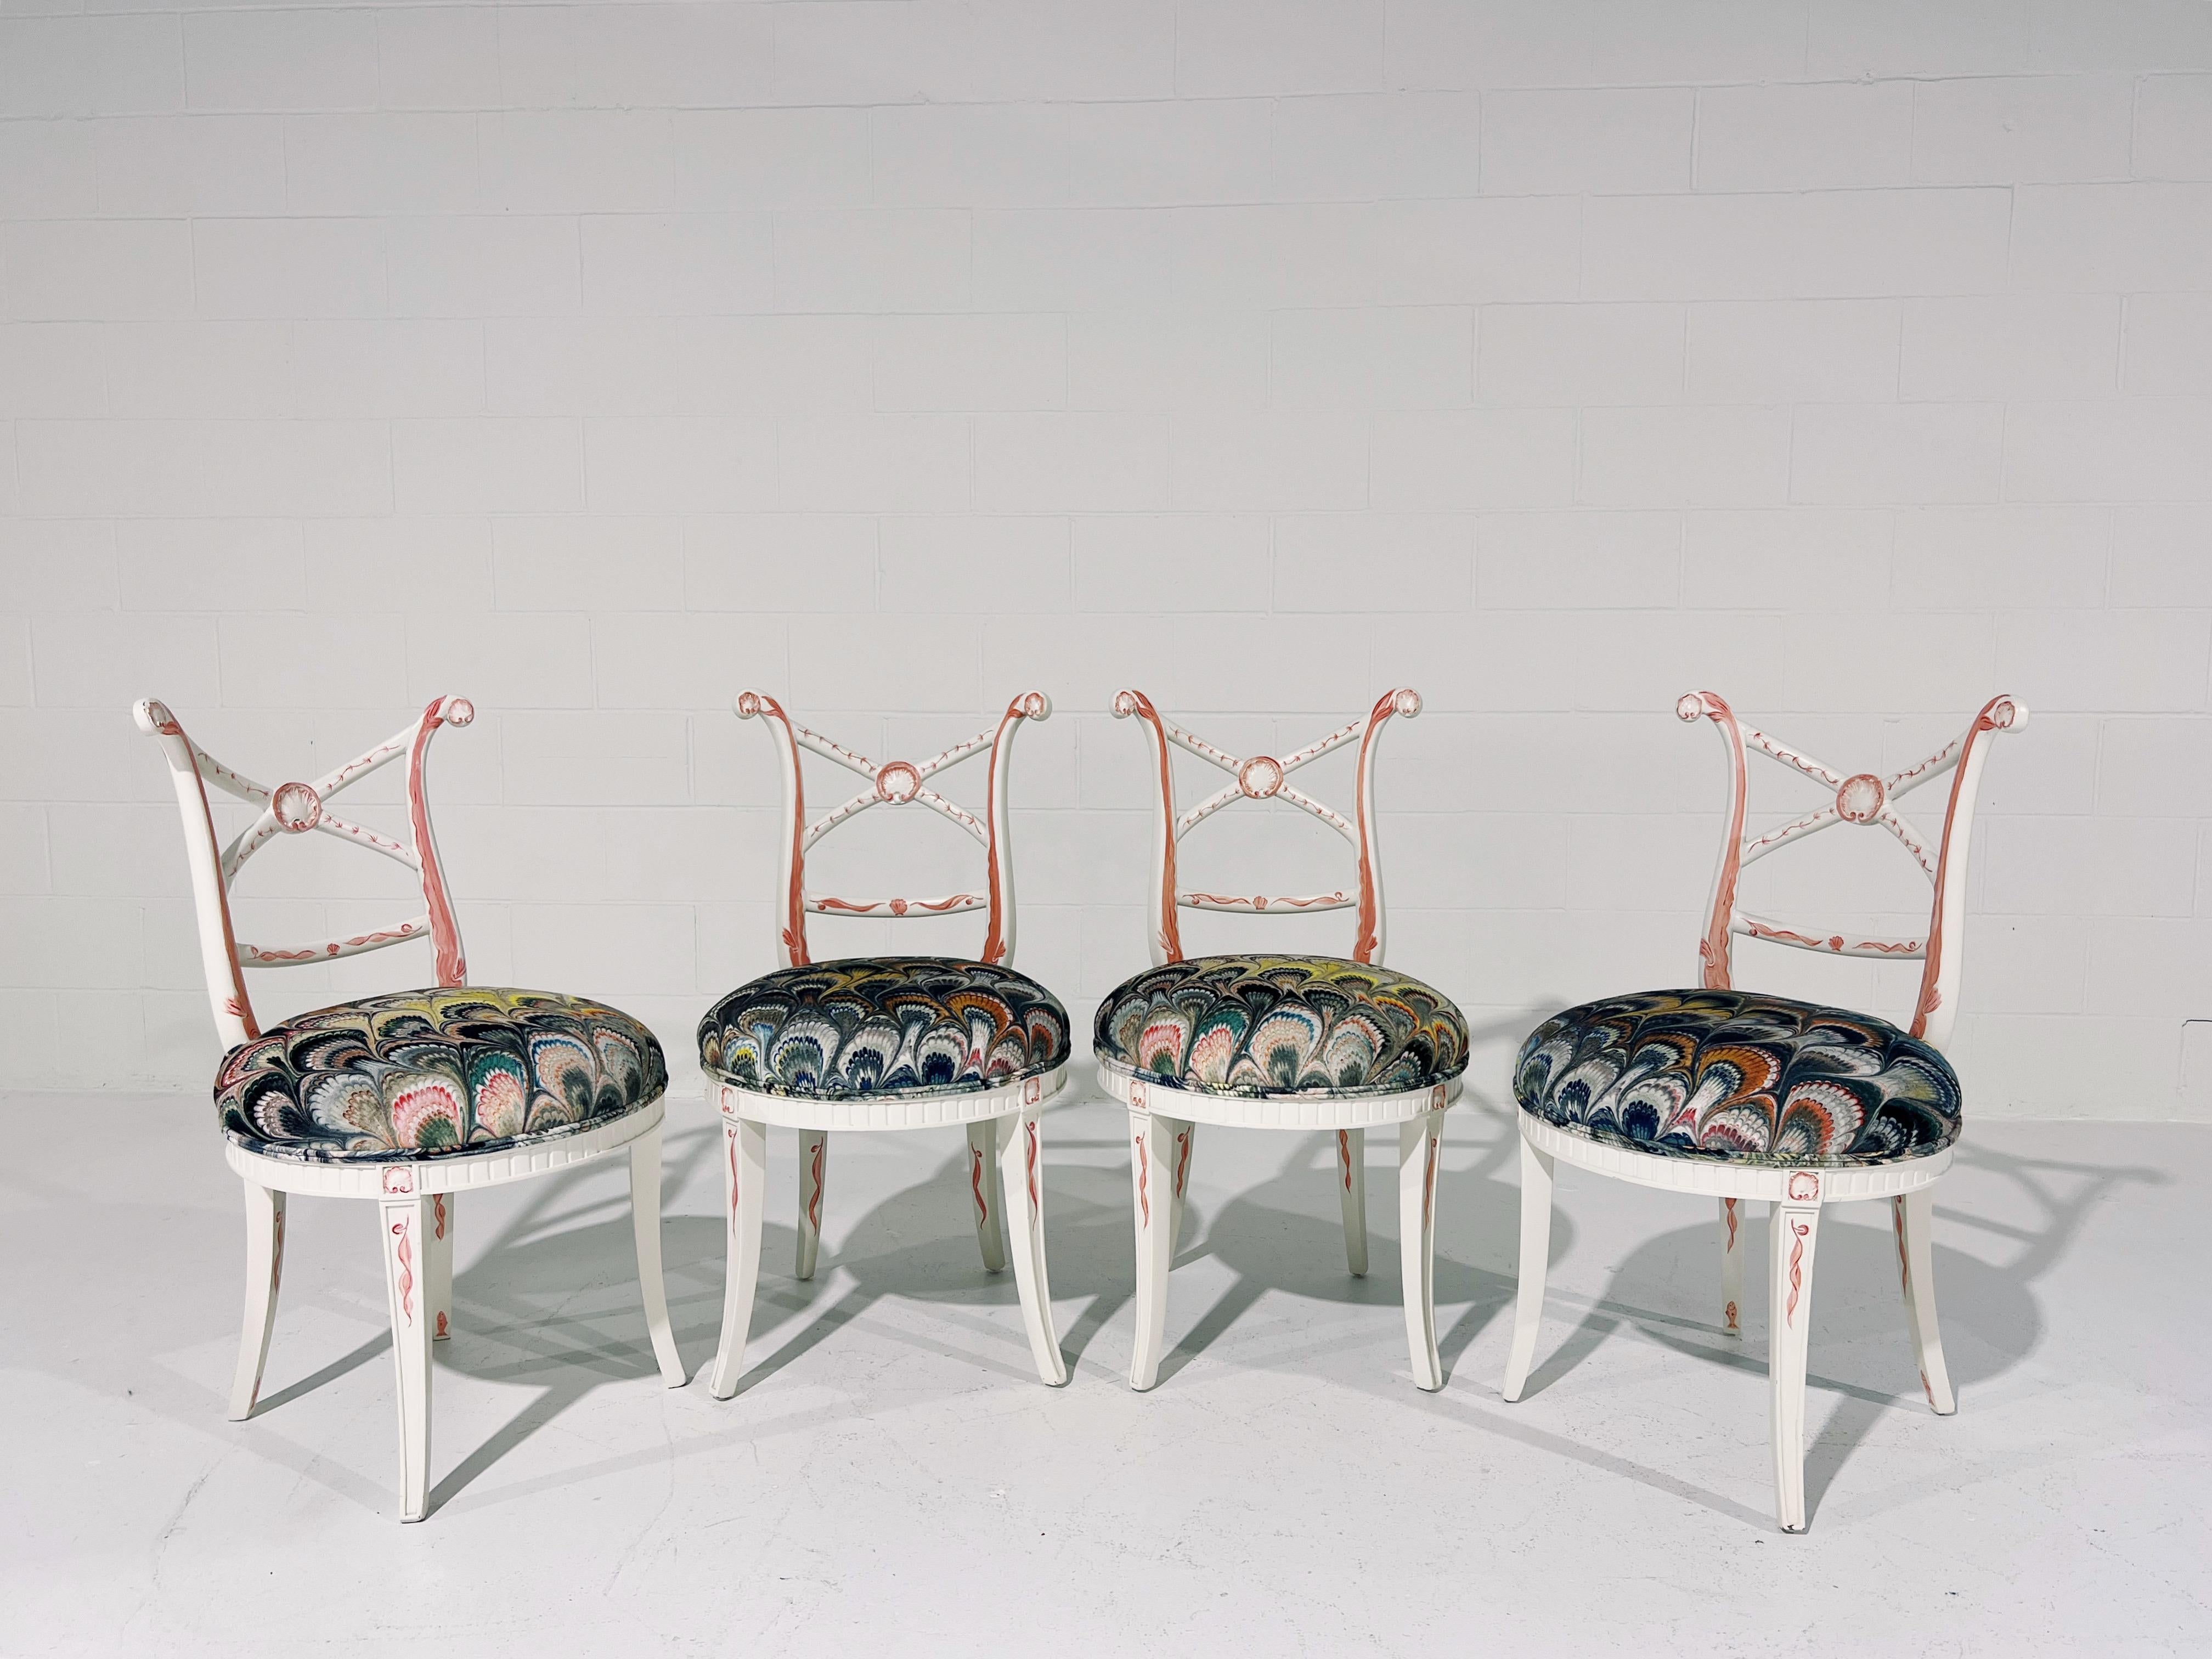 American One-of-a-kind, Hand-Painted 'Sea Monsters' Chairs, Set of 4 For Sale